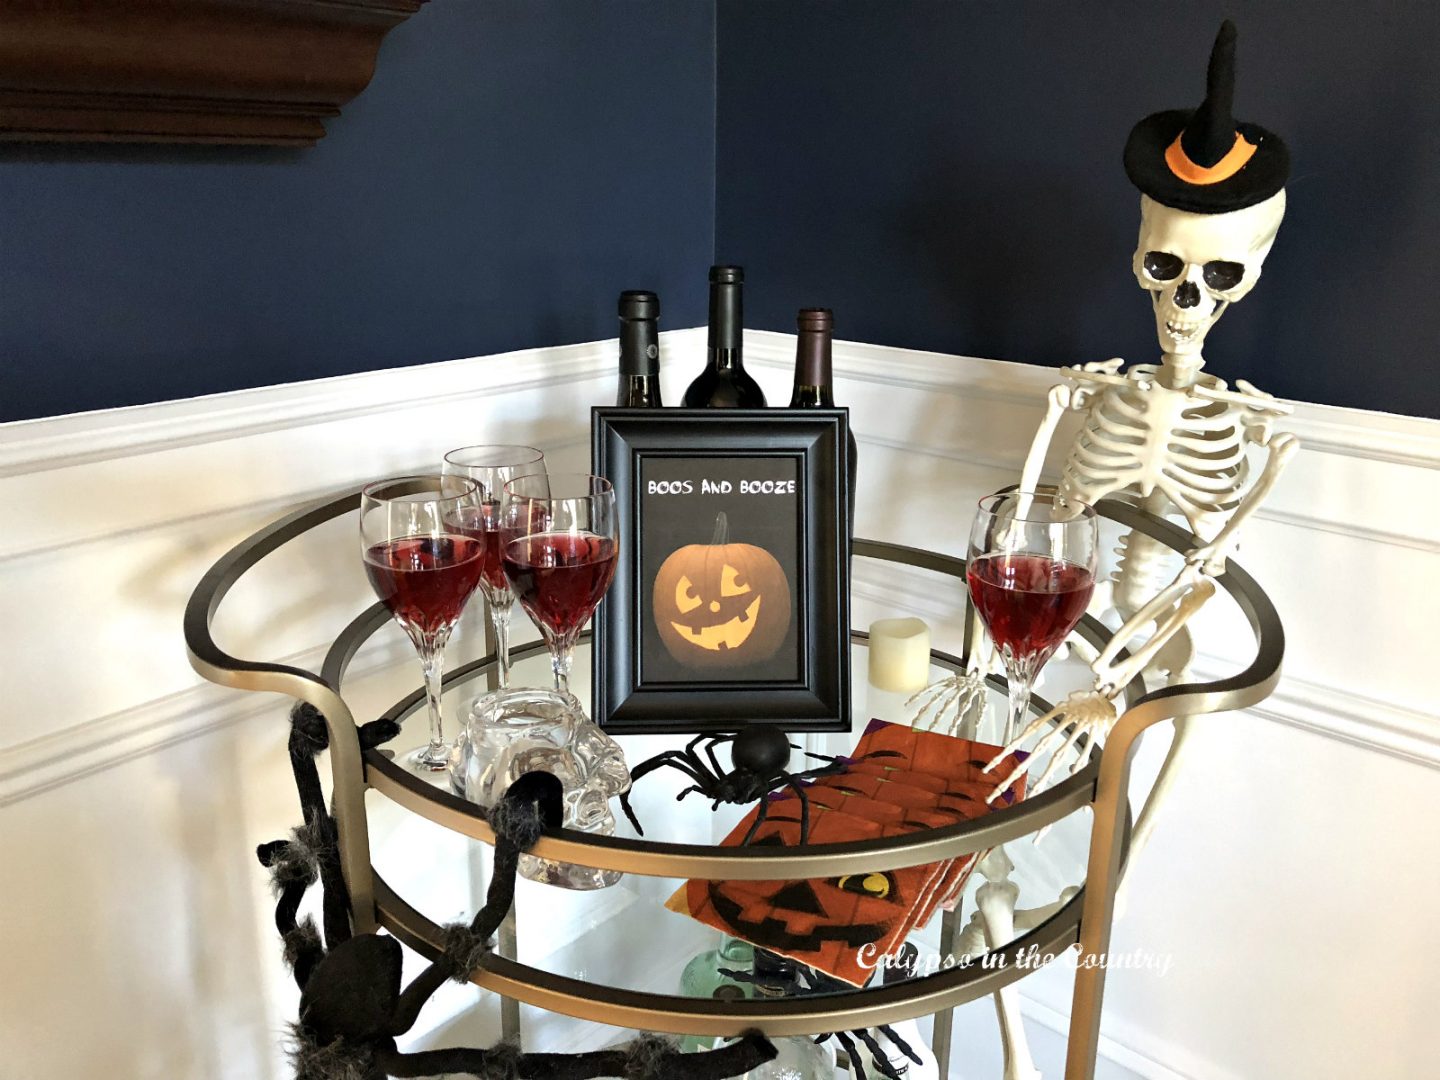 How to decorate a bar cart for Halloween